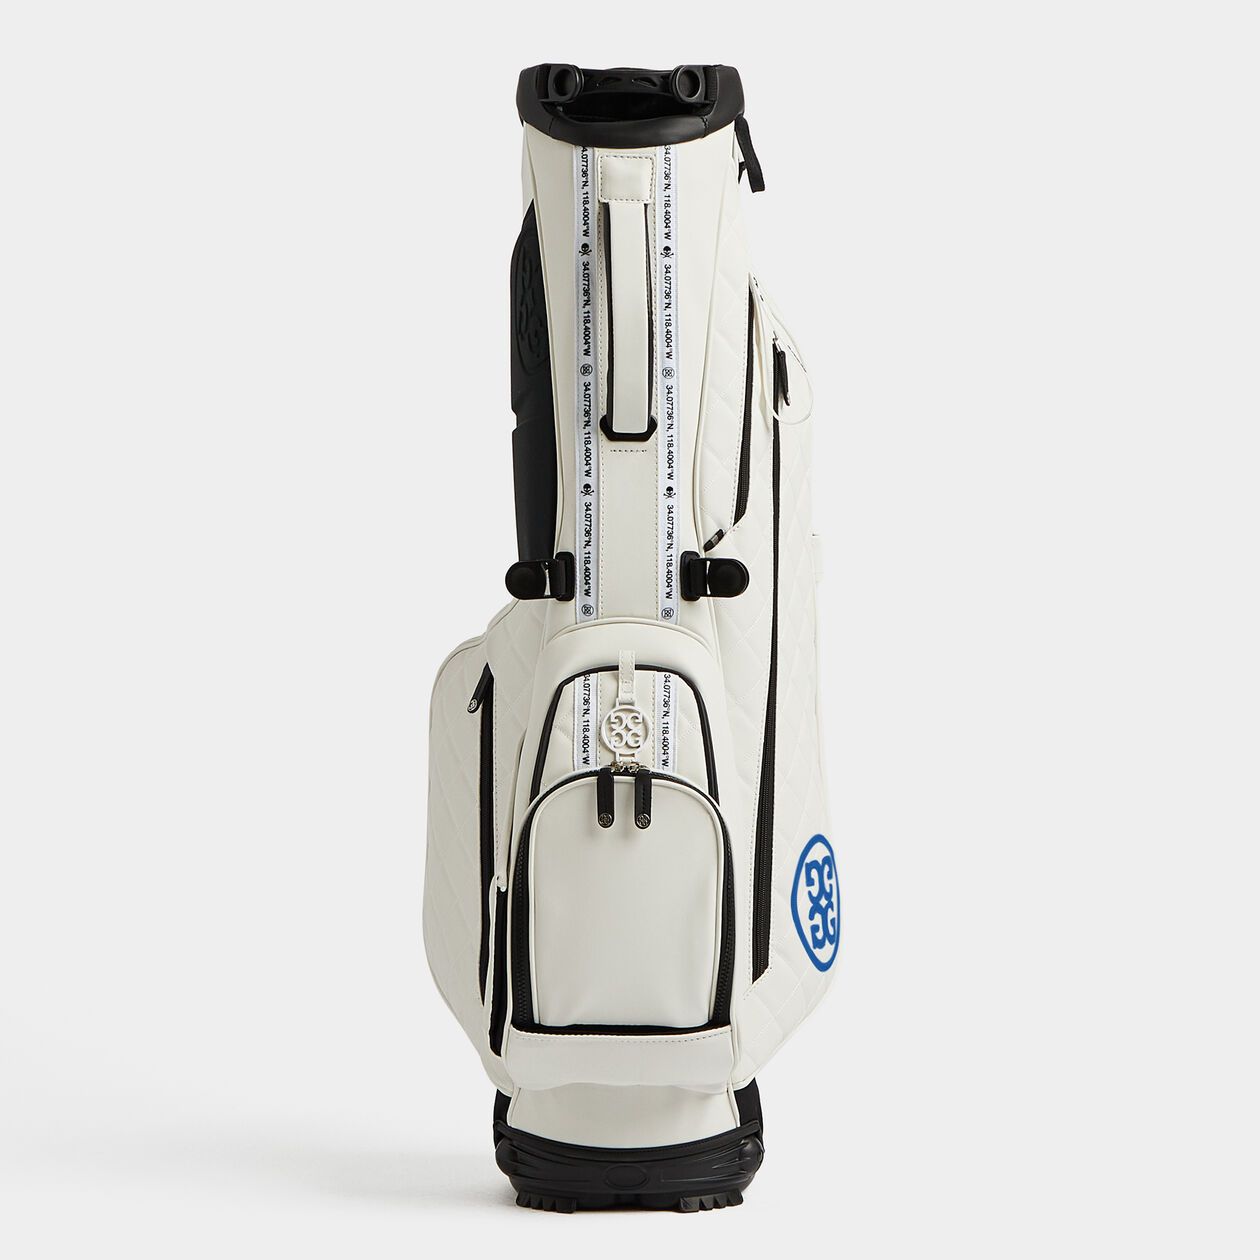 DAYTONA PLUS CARRY GOLF BAG | GOLF BAGS FOR MEN AND WOMEN | G/FORE | G/FORE | GFORE.com